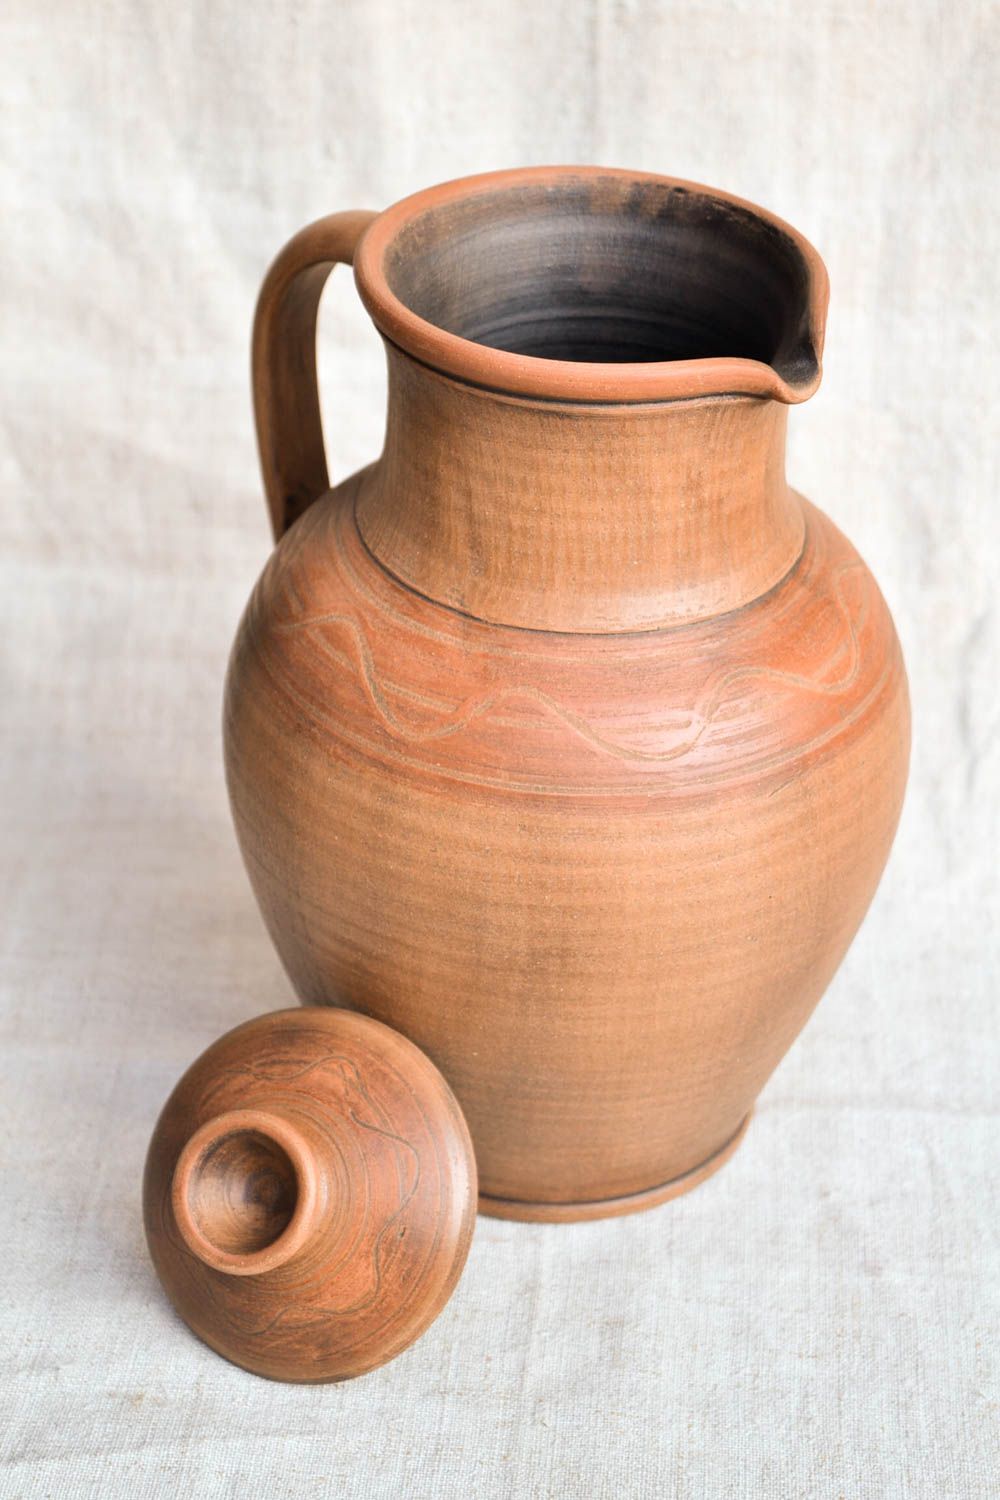 90 oz ceramic wine pitcher with handle and lid in terracotta color 2,4 lb photo 4